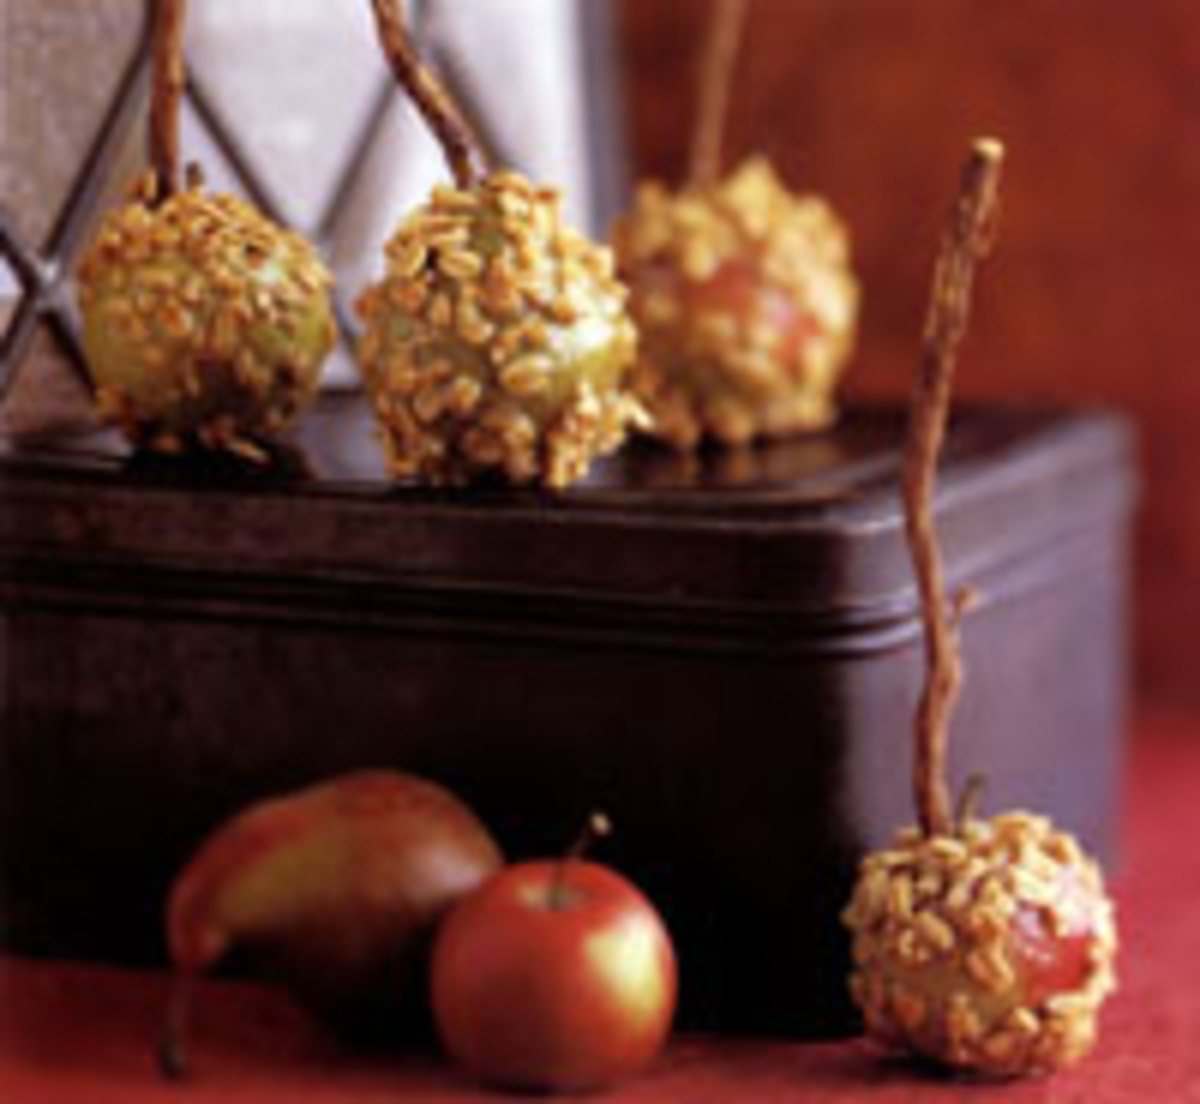 Caramel Apples and Pears